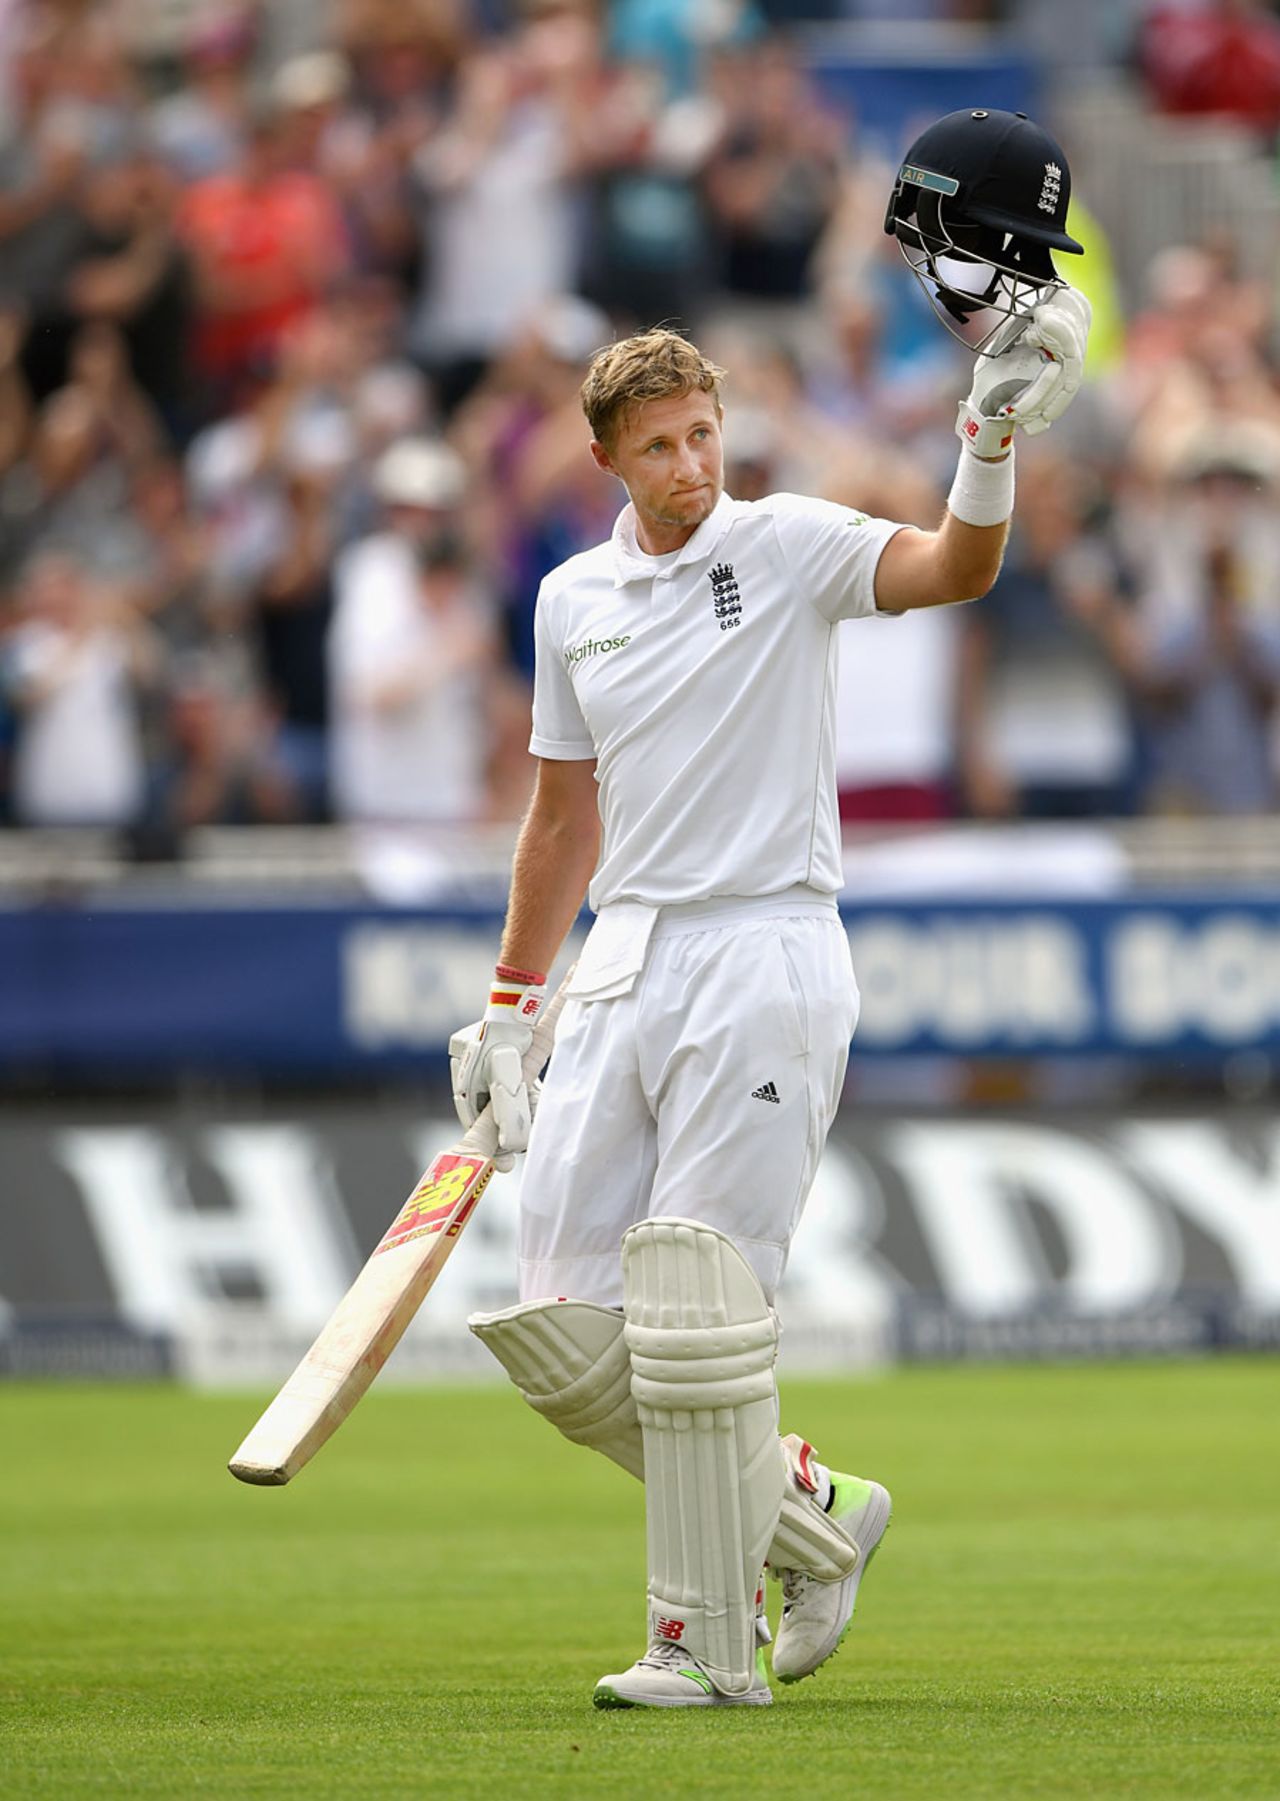 Joe Root takes in the standing ovation for his innings, England v Pakistan, 2nd Investec Test, Old Trafford, 2nd day, July 23, 2016